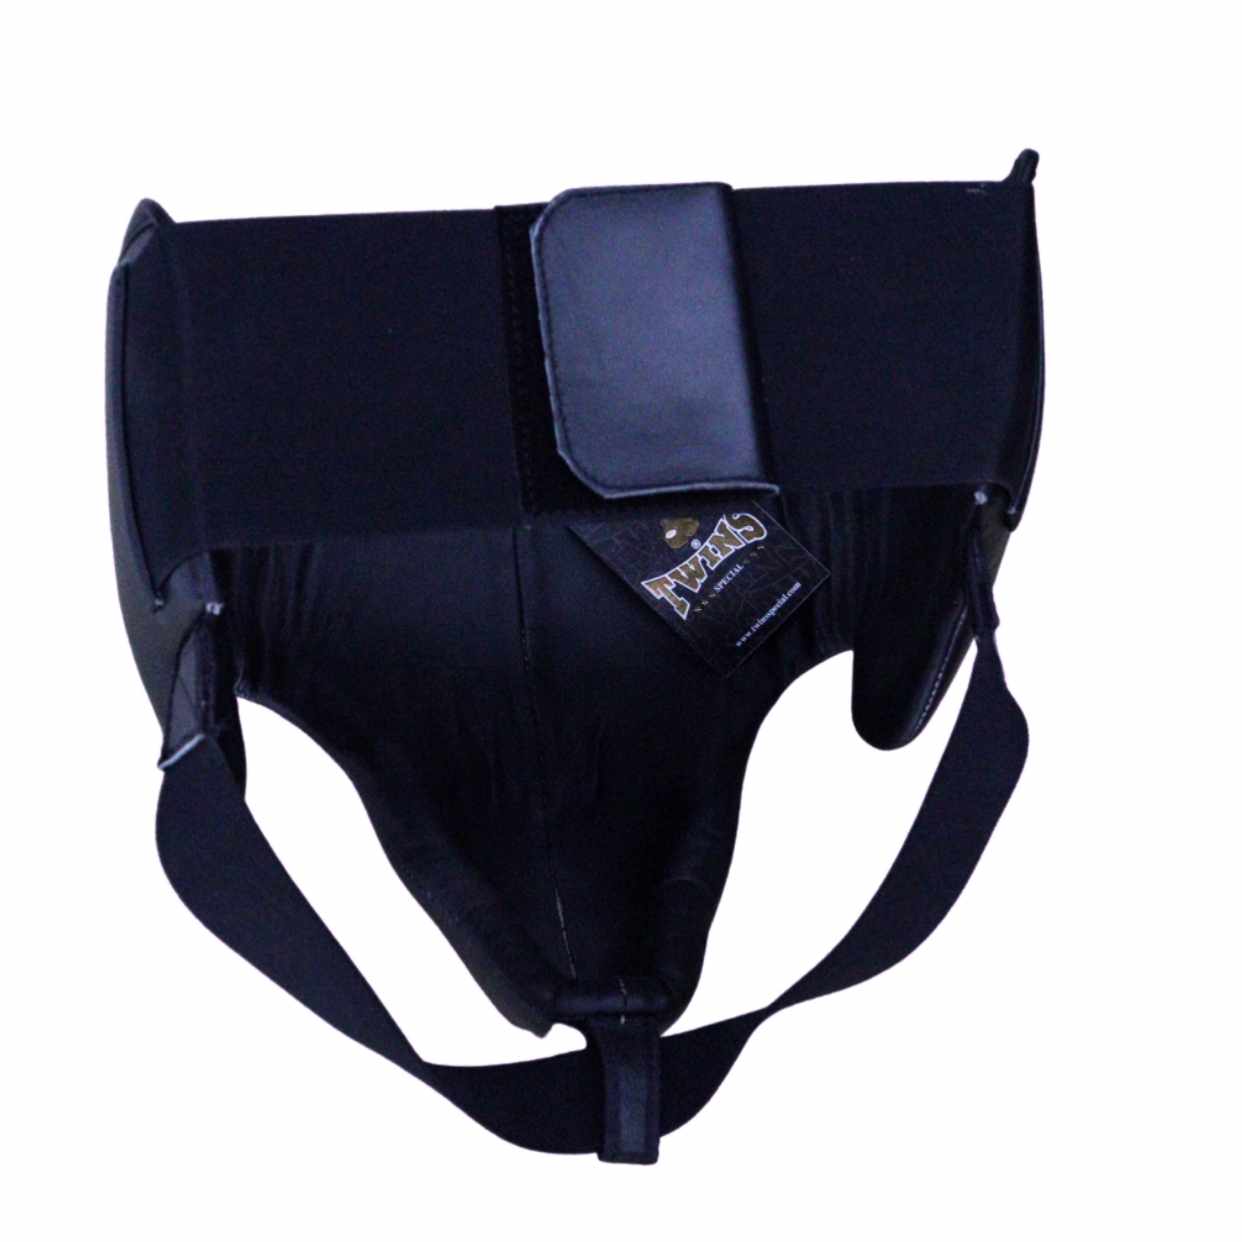 Twins Special "APS1" Boxing Abdominal Guard